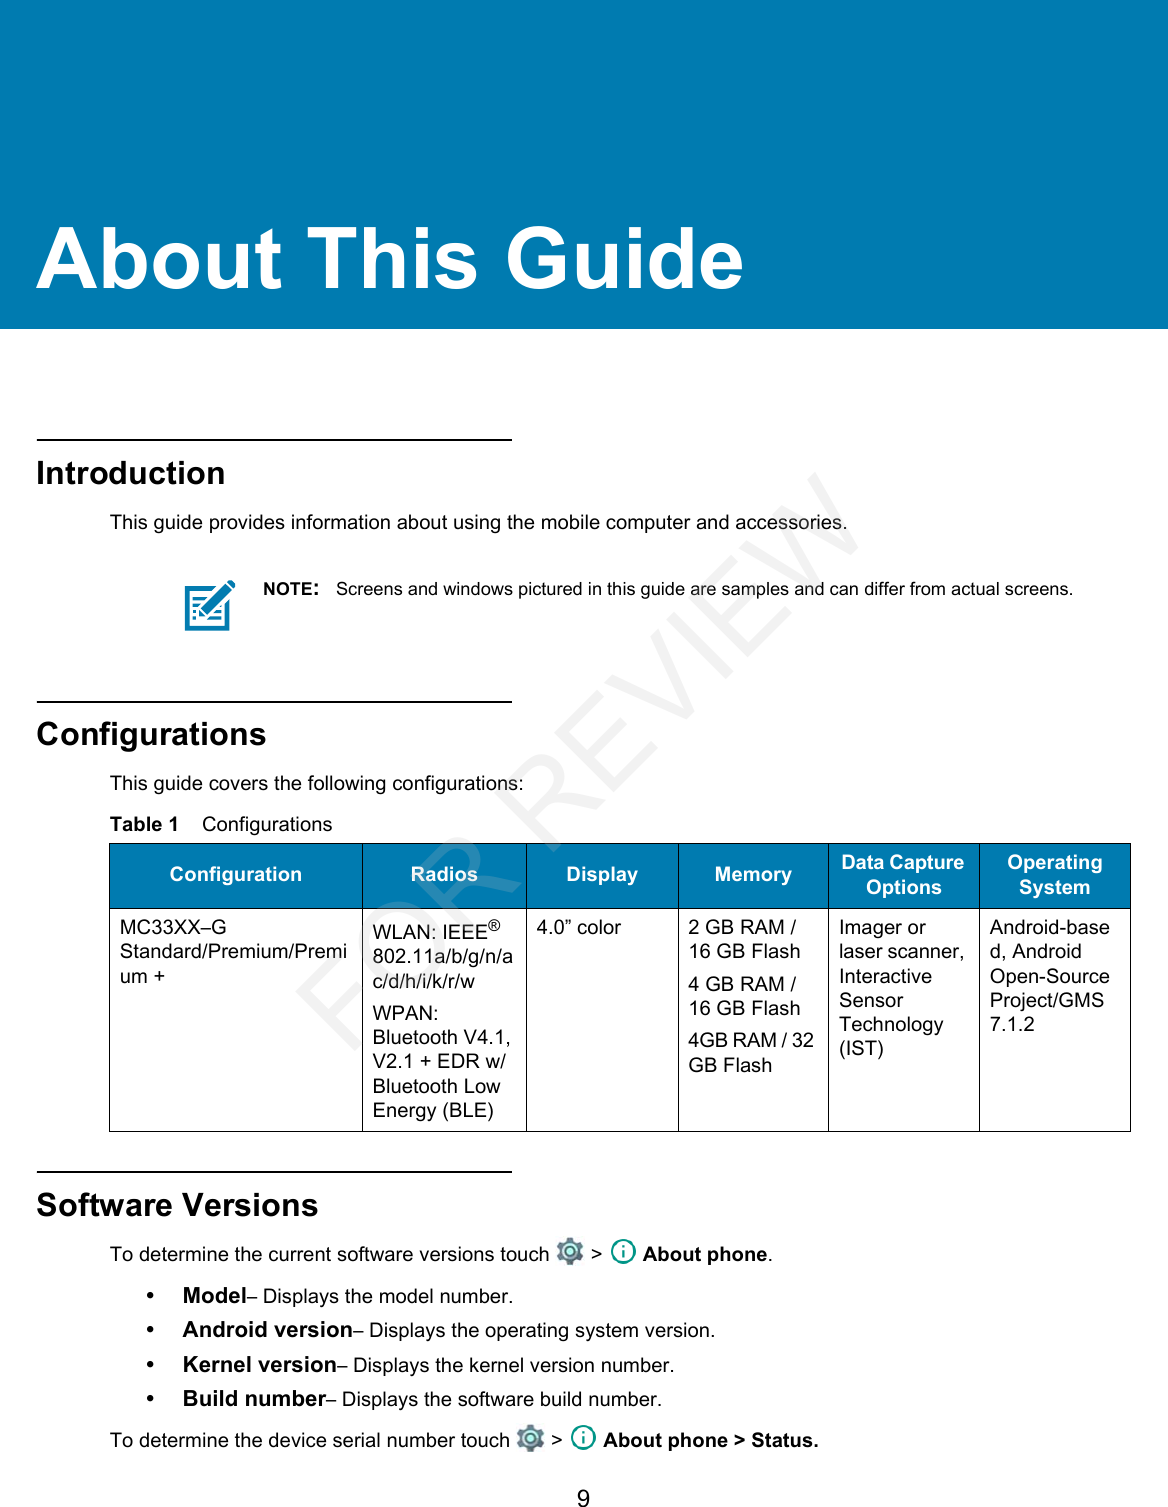 9About This GuideIntroductionThis guide provides information about using the mobile computer and accessories.ConfigurationsThis guide covers the following configurations:Software VersionsTo determine the current software versions touch   &gt;   About phone.•Model– Displays the model number.• Android version– Displays the operating system version.• Kernel version– Displays the kernel version number.• Build number– Displays the software build number.To determine the device serial number touch   &gt;   About phone &gt; Status.NOTE:Screens and windows pictured in this guide are samples and can differ from actual screens.Table 1    ConfigurationsConfiguration Radios Display Memory Data Capture OptionsOperating SystemMC33XX–G Standard/Premium/Premium +WLAN: IEEE® 802.11a/b/g/n/ac/d/h/i/k/r/wWPAN: Bluetooth V4.1, V2.1 + EDR w/ Bluetooth Low Energy (BLE)4.0” color 2 GB RAM / 16 GB Flash4 GB RAM / 16 GB Flash4GB RAM / 32 GB FlashImager or laser scanner, Interactive Sensor Technology (IST)Android-based, Android Open-Source Project/GMS 7.1.2FOR REVIEW